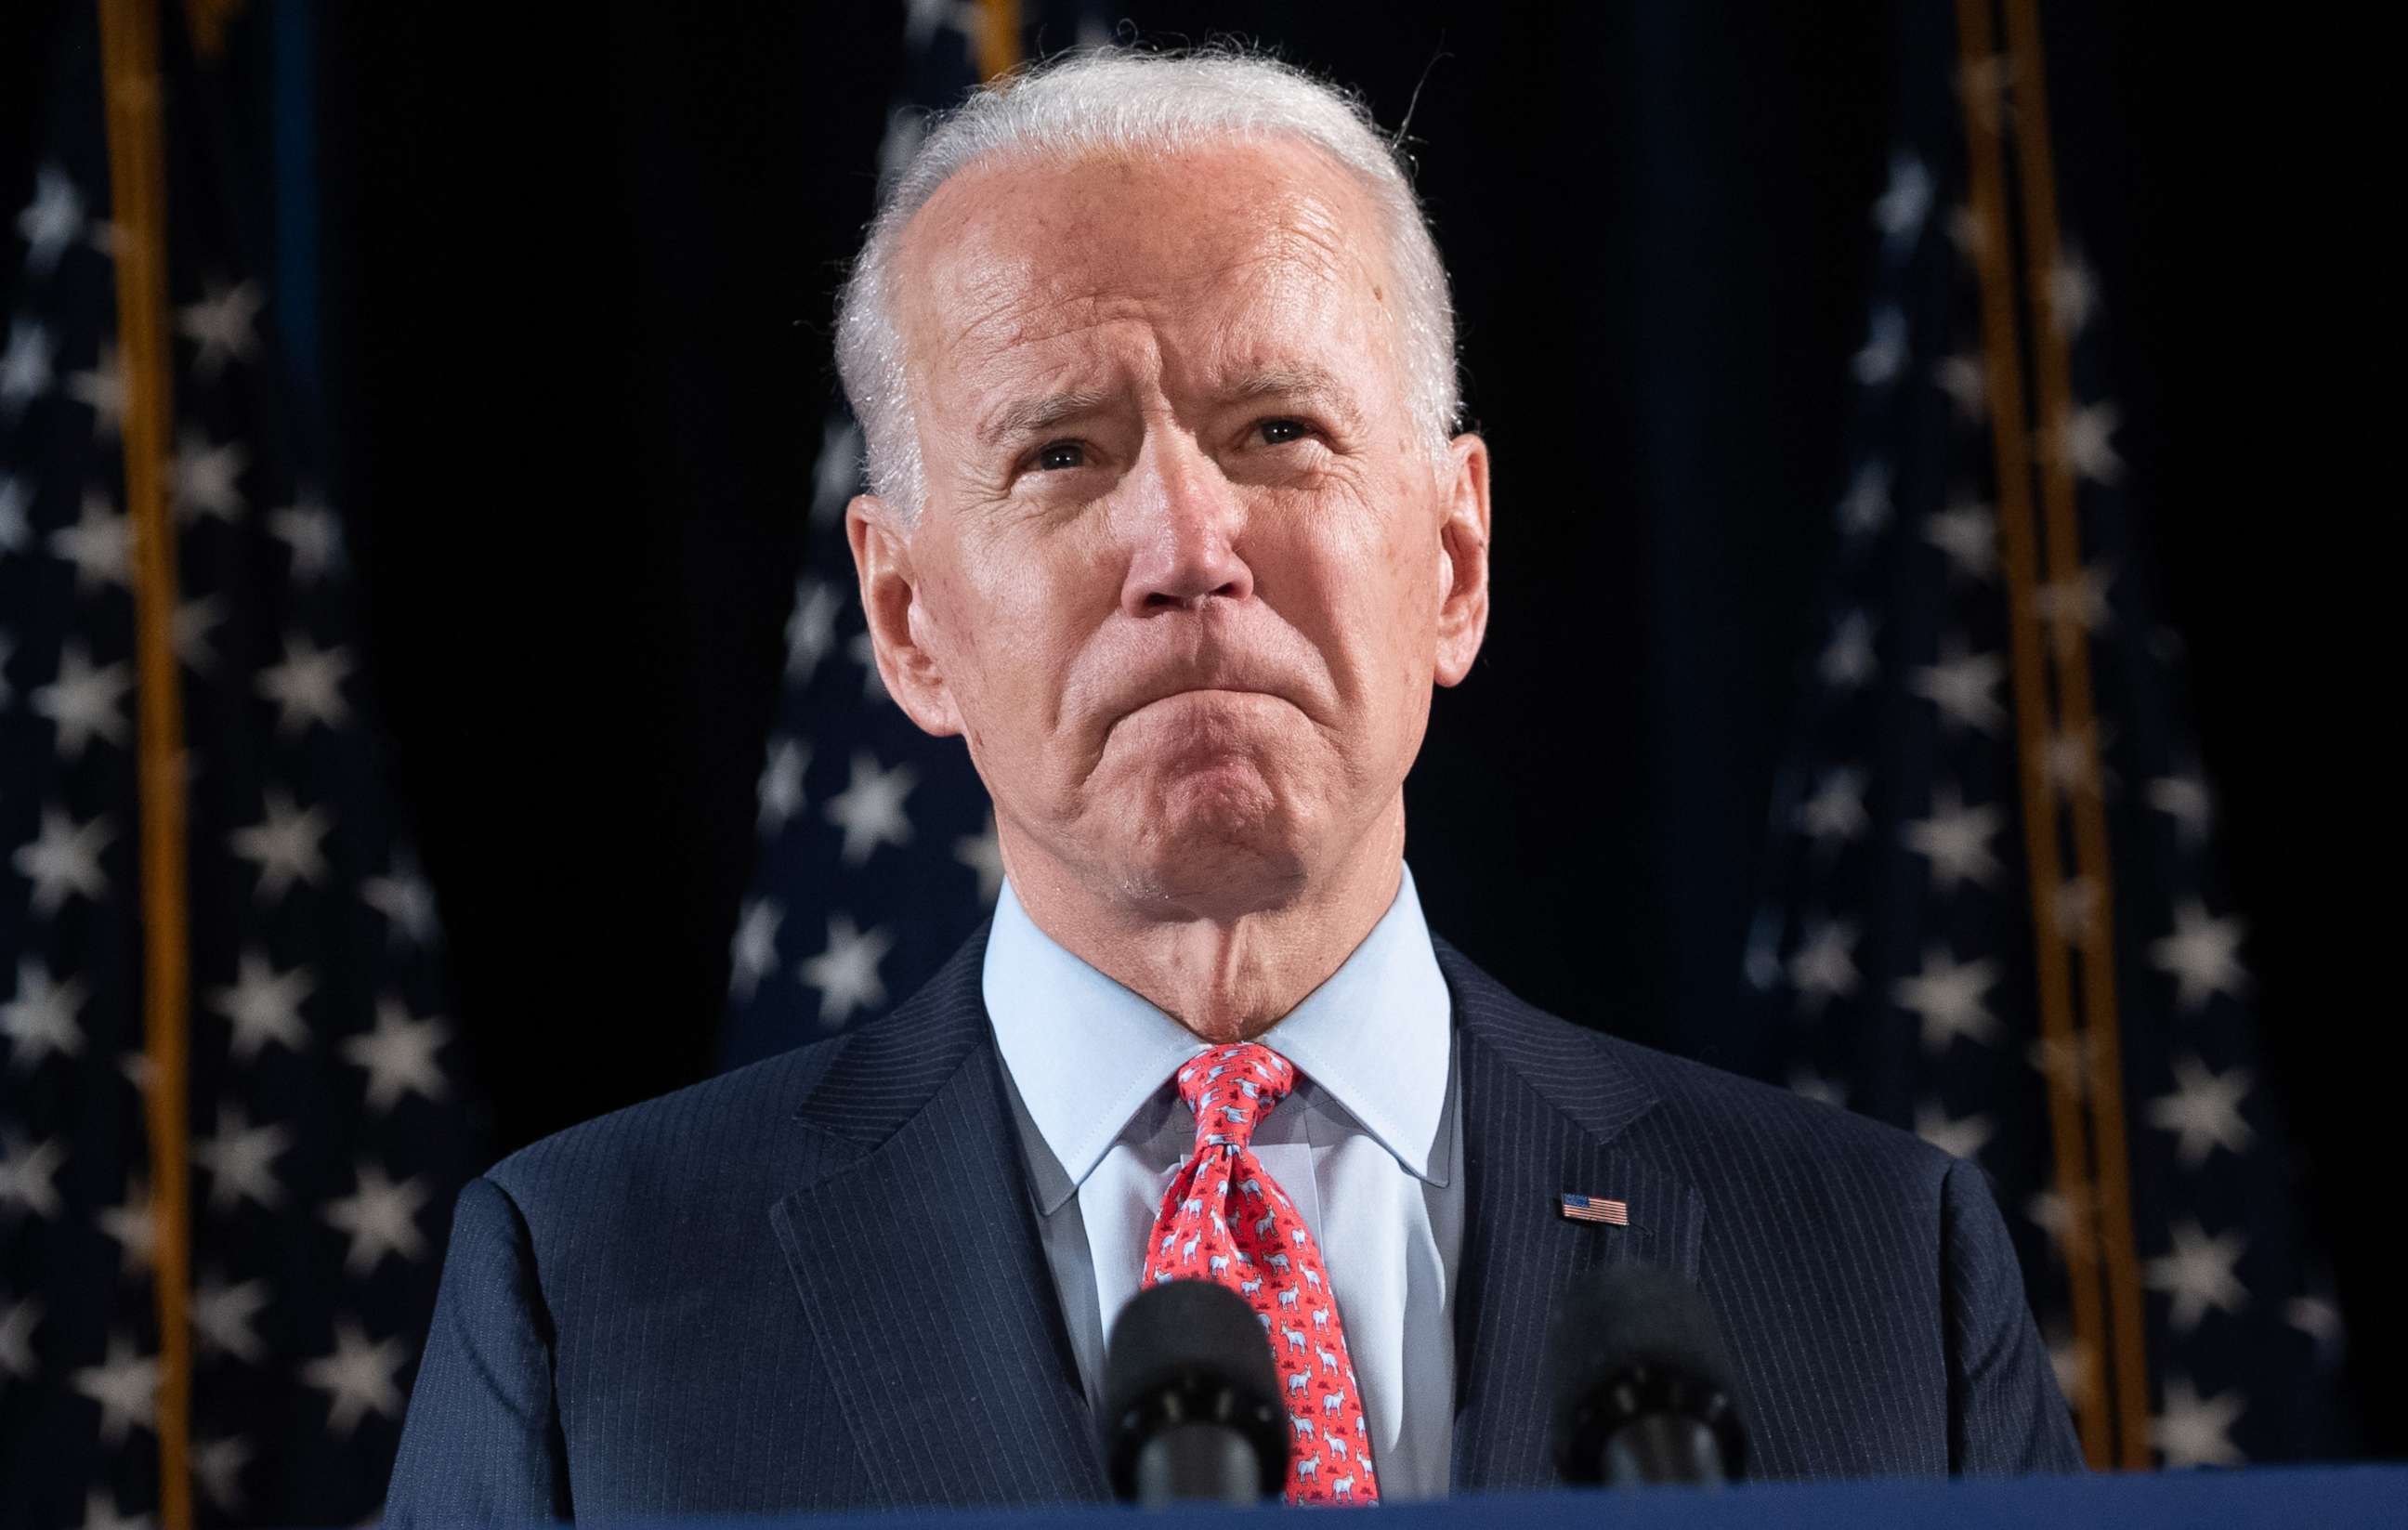 PHOTO: Joe Biden speaks about COVID-19 during a press event in Wilmington, Delaware, March 12, 2020. 